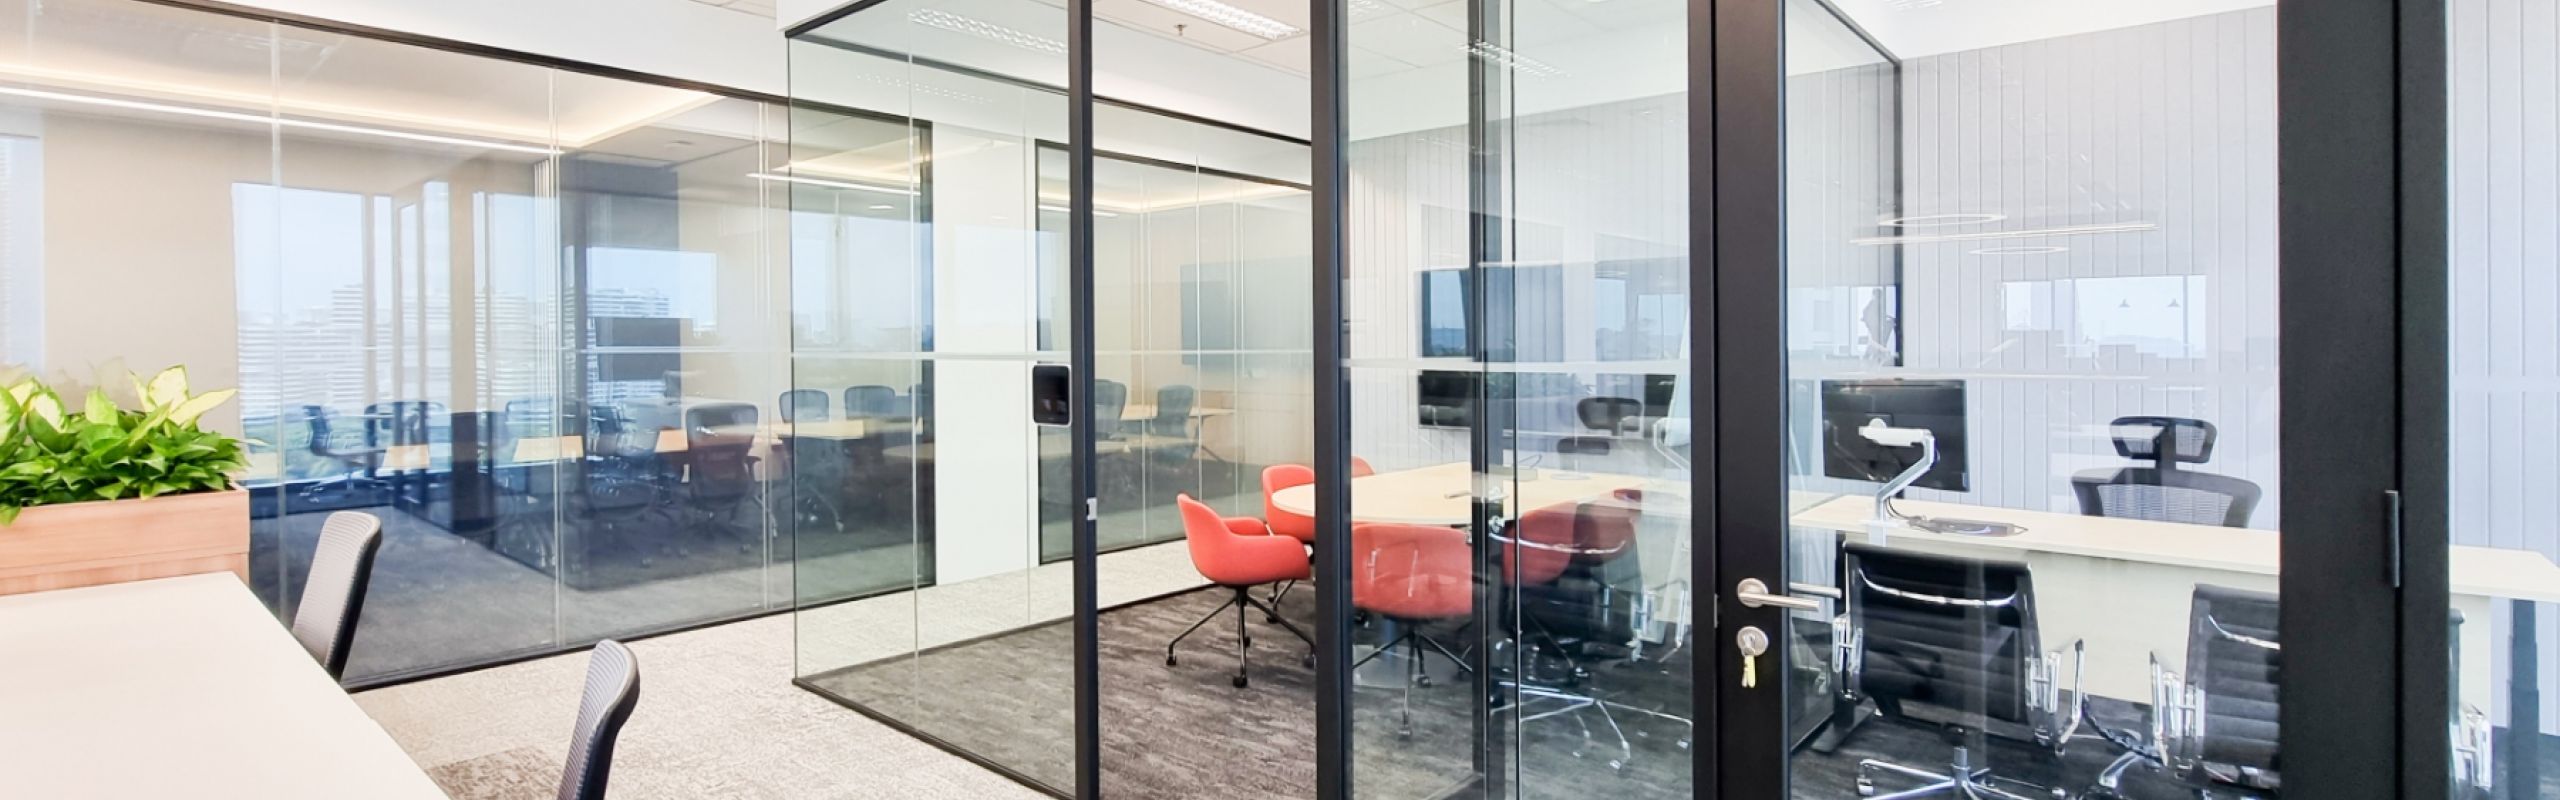 Incorporating Switchable Smart Glass in Workspace Design